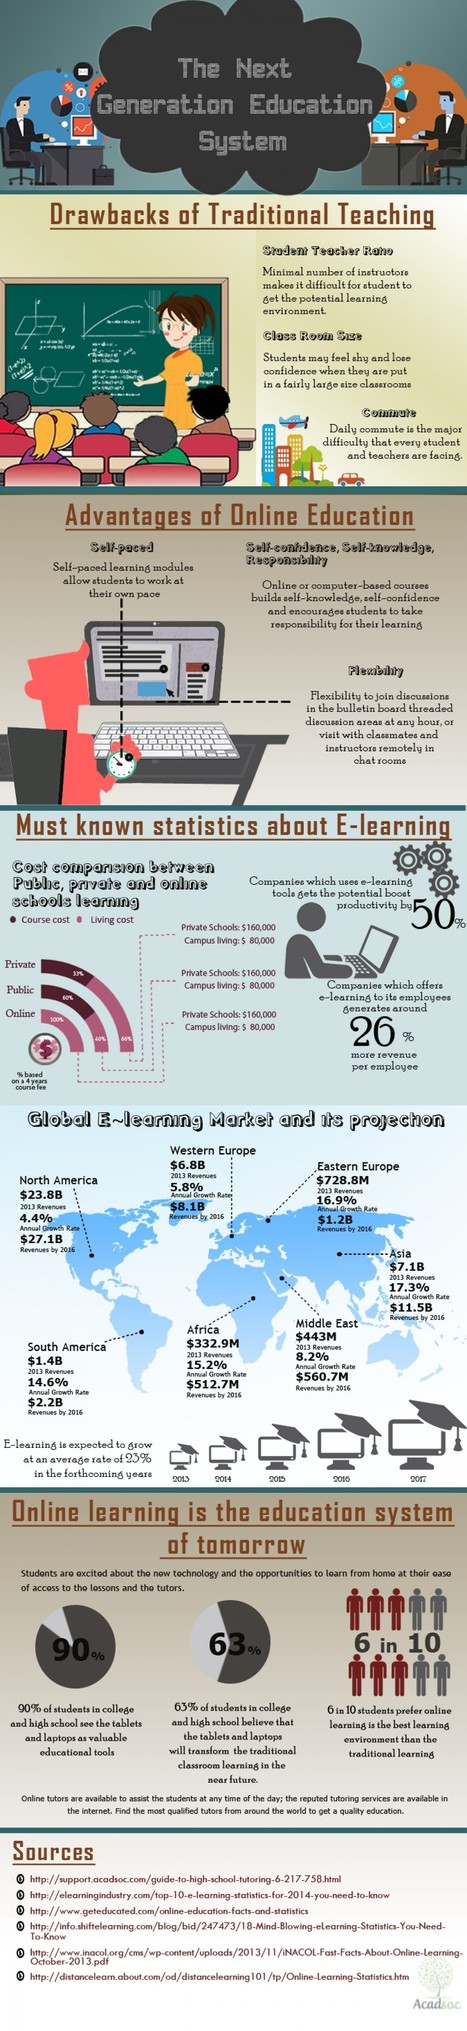 The next generation of education system [Infographic] | Higher Education Teaching and Learning | Scoop.it